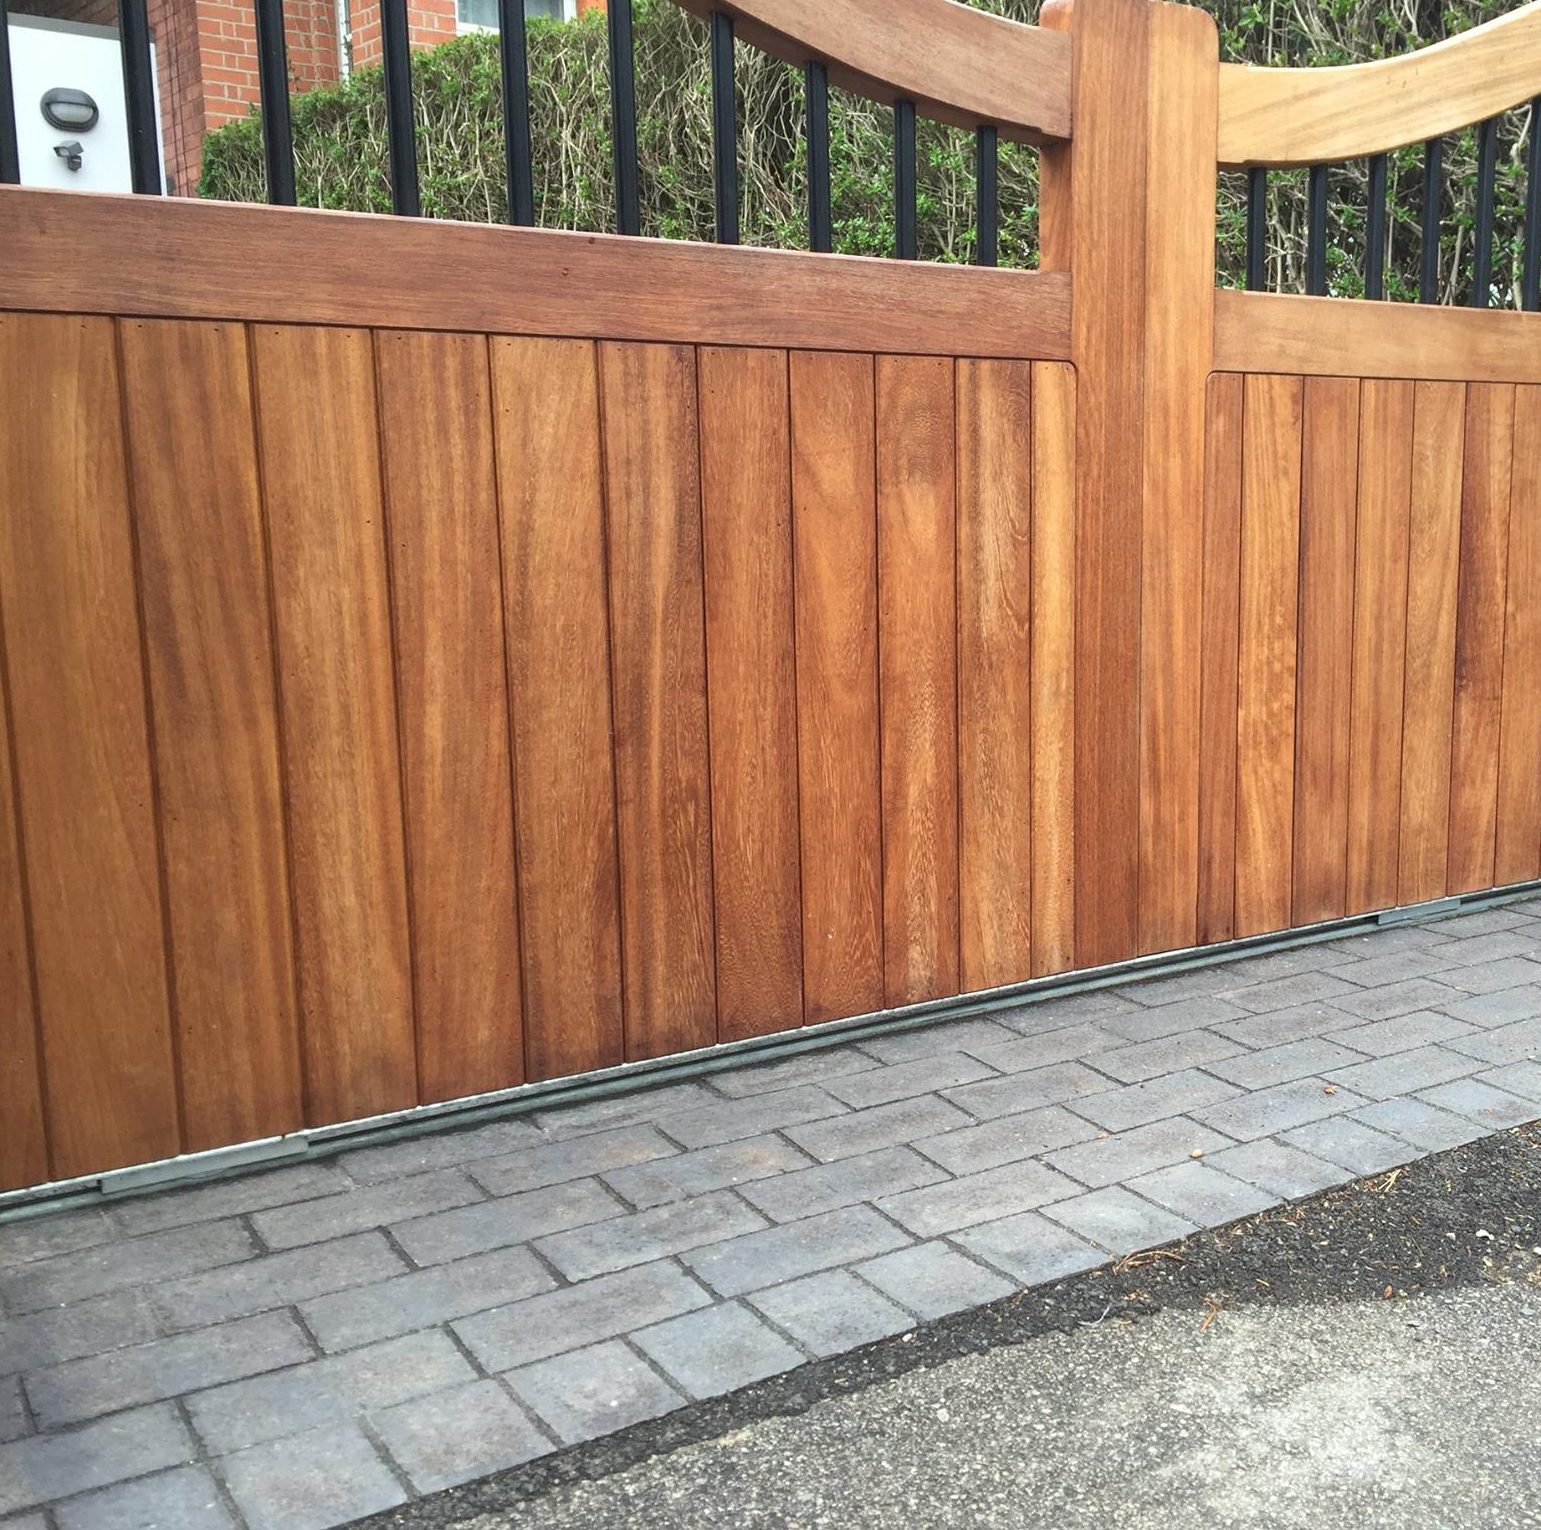 Timber gates suitable for a driveway